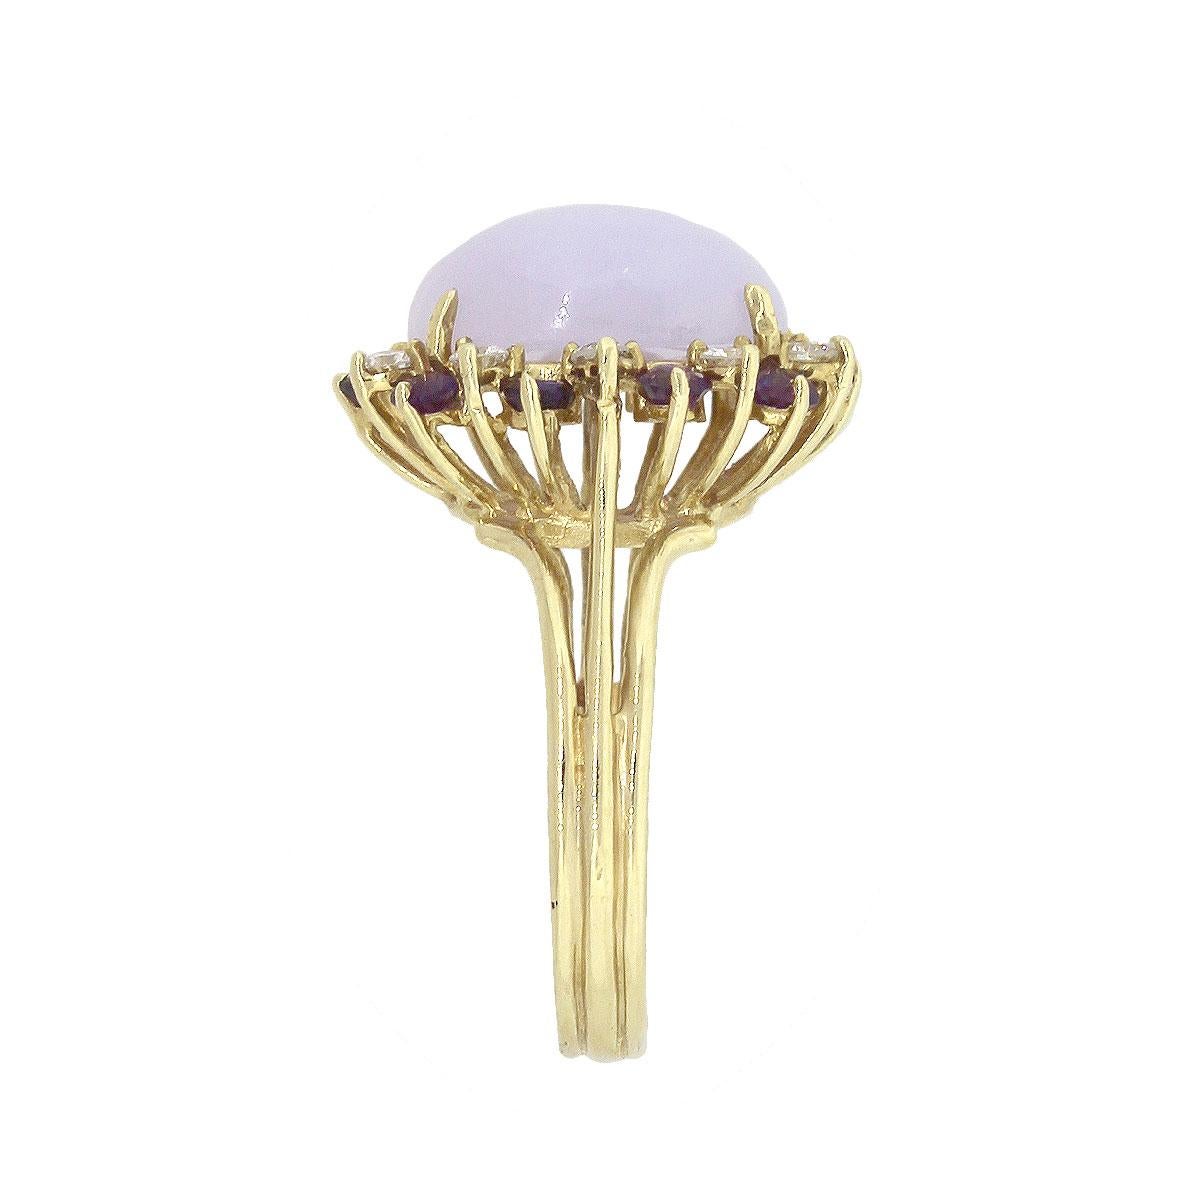 Style: Round Diamond Lavender Jade Ladies Ring
Material: 14k Yellow Gold
Gemstone Details: Oval Cabochon Lavender Jade measuring approx 13mm x 10mm. 0.30ctw of round amethyst stones.
Diamond Details: Approx. 0.30ctw of round cut diamonds. Diamonds